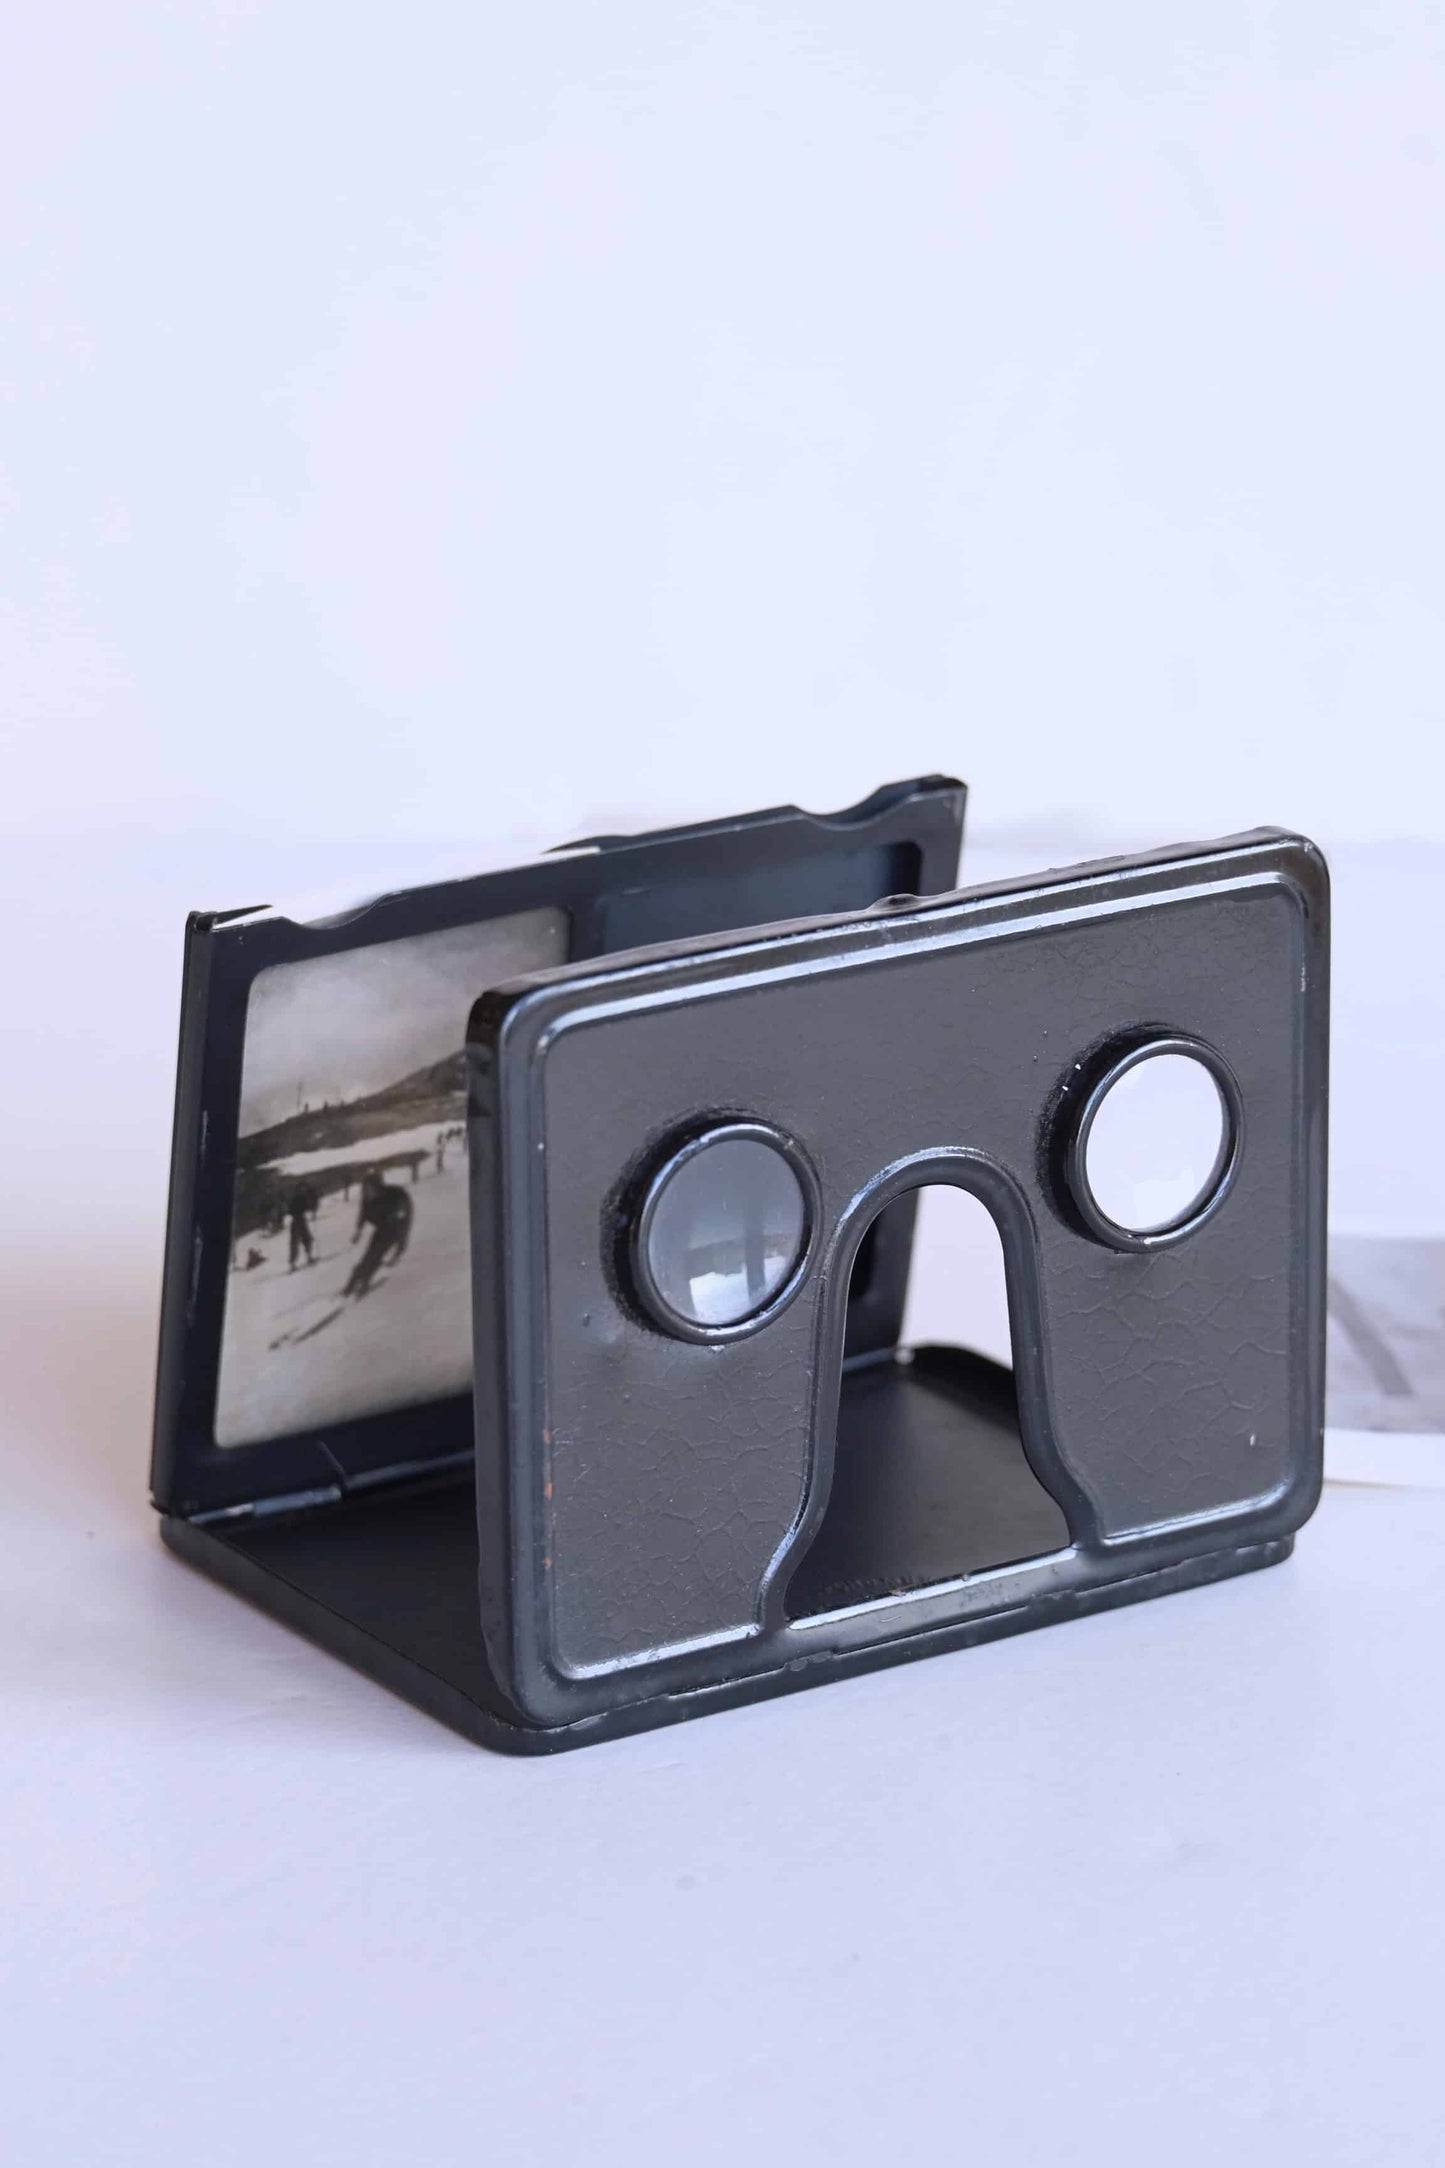 STEREO INDUPOR Folding 3D Viewer Stereoscope with photos inserted inside